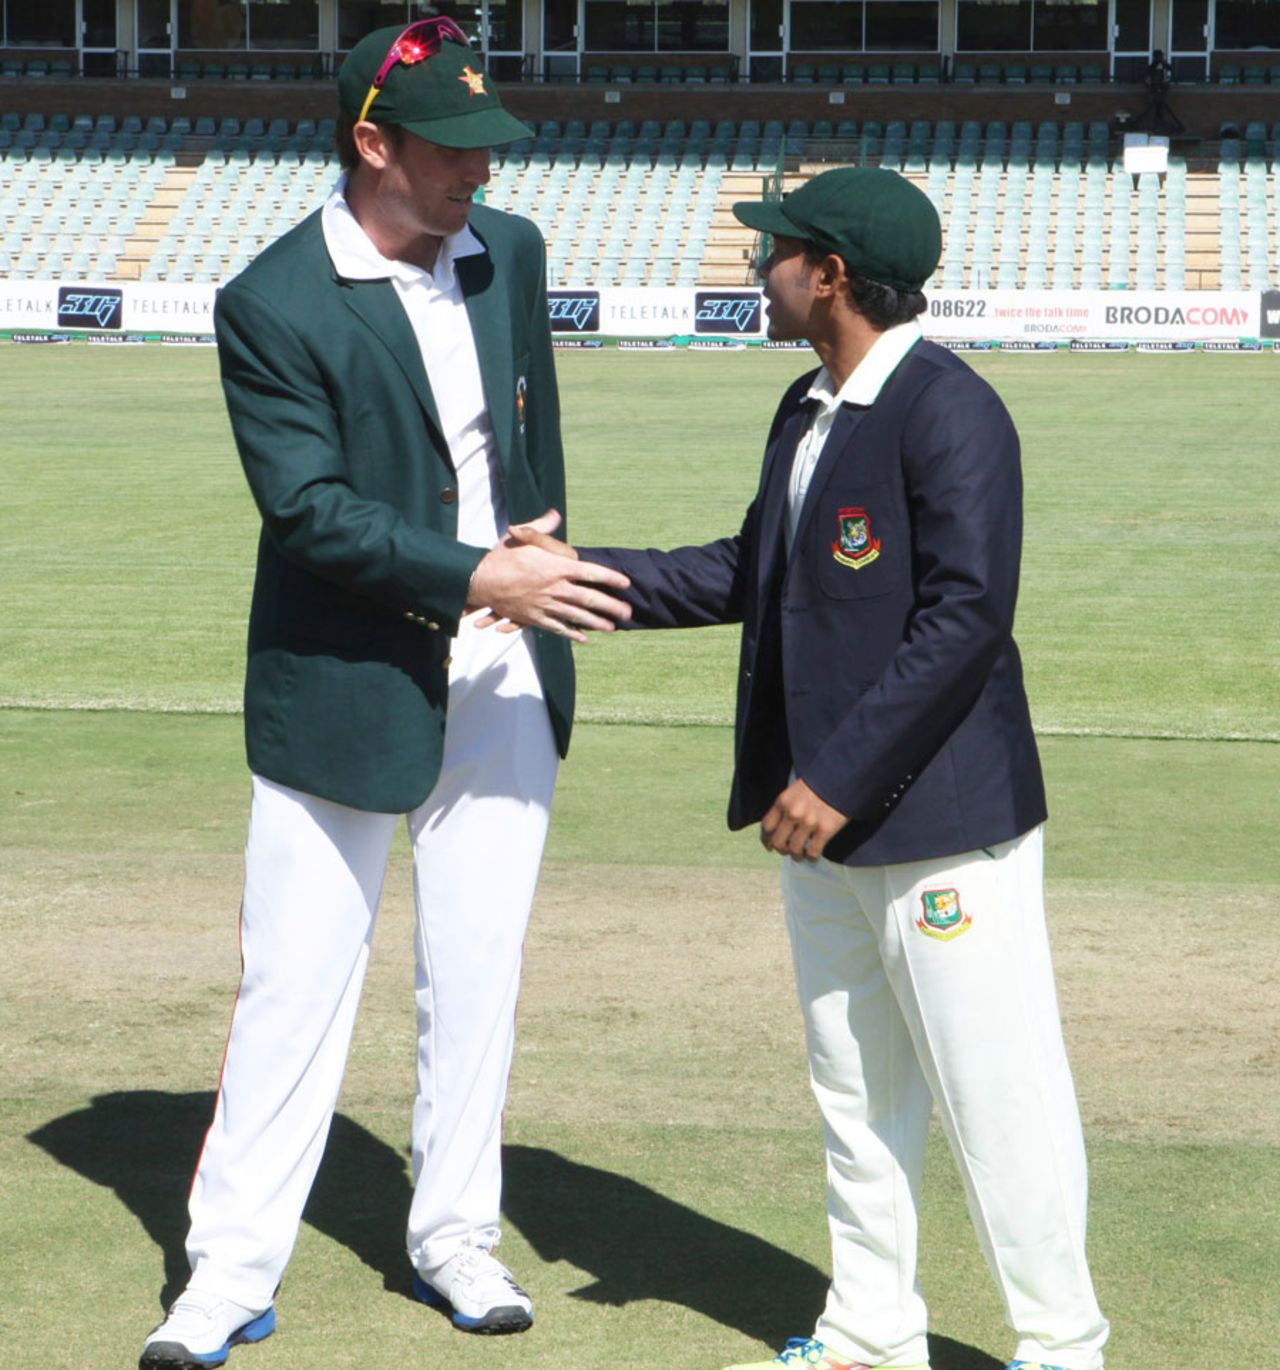 Zimbabwe captain Brendan Taylor with Bangladesh captain Mushfiqur Rahim, Zimbabwe v Bangladesh, 1st Test, Harare, 1st day, April 17, 2013